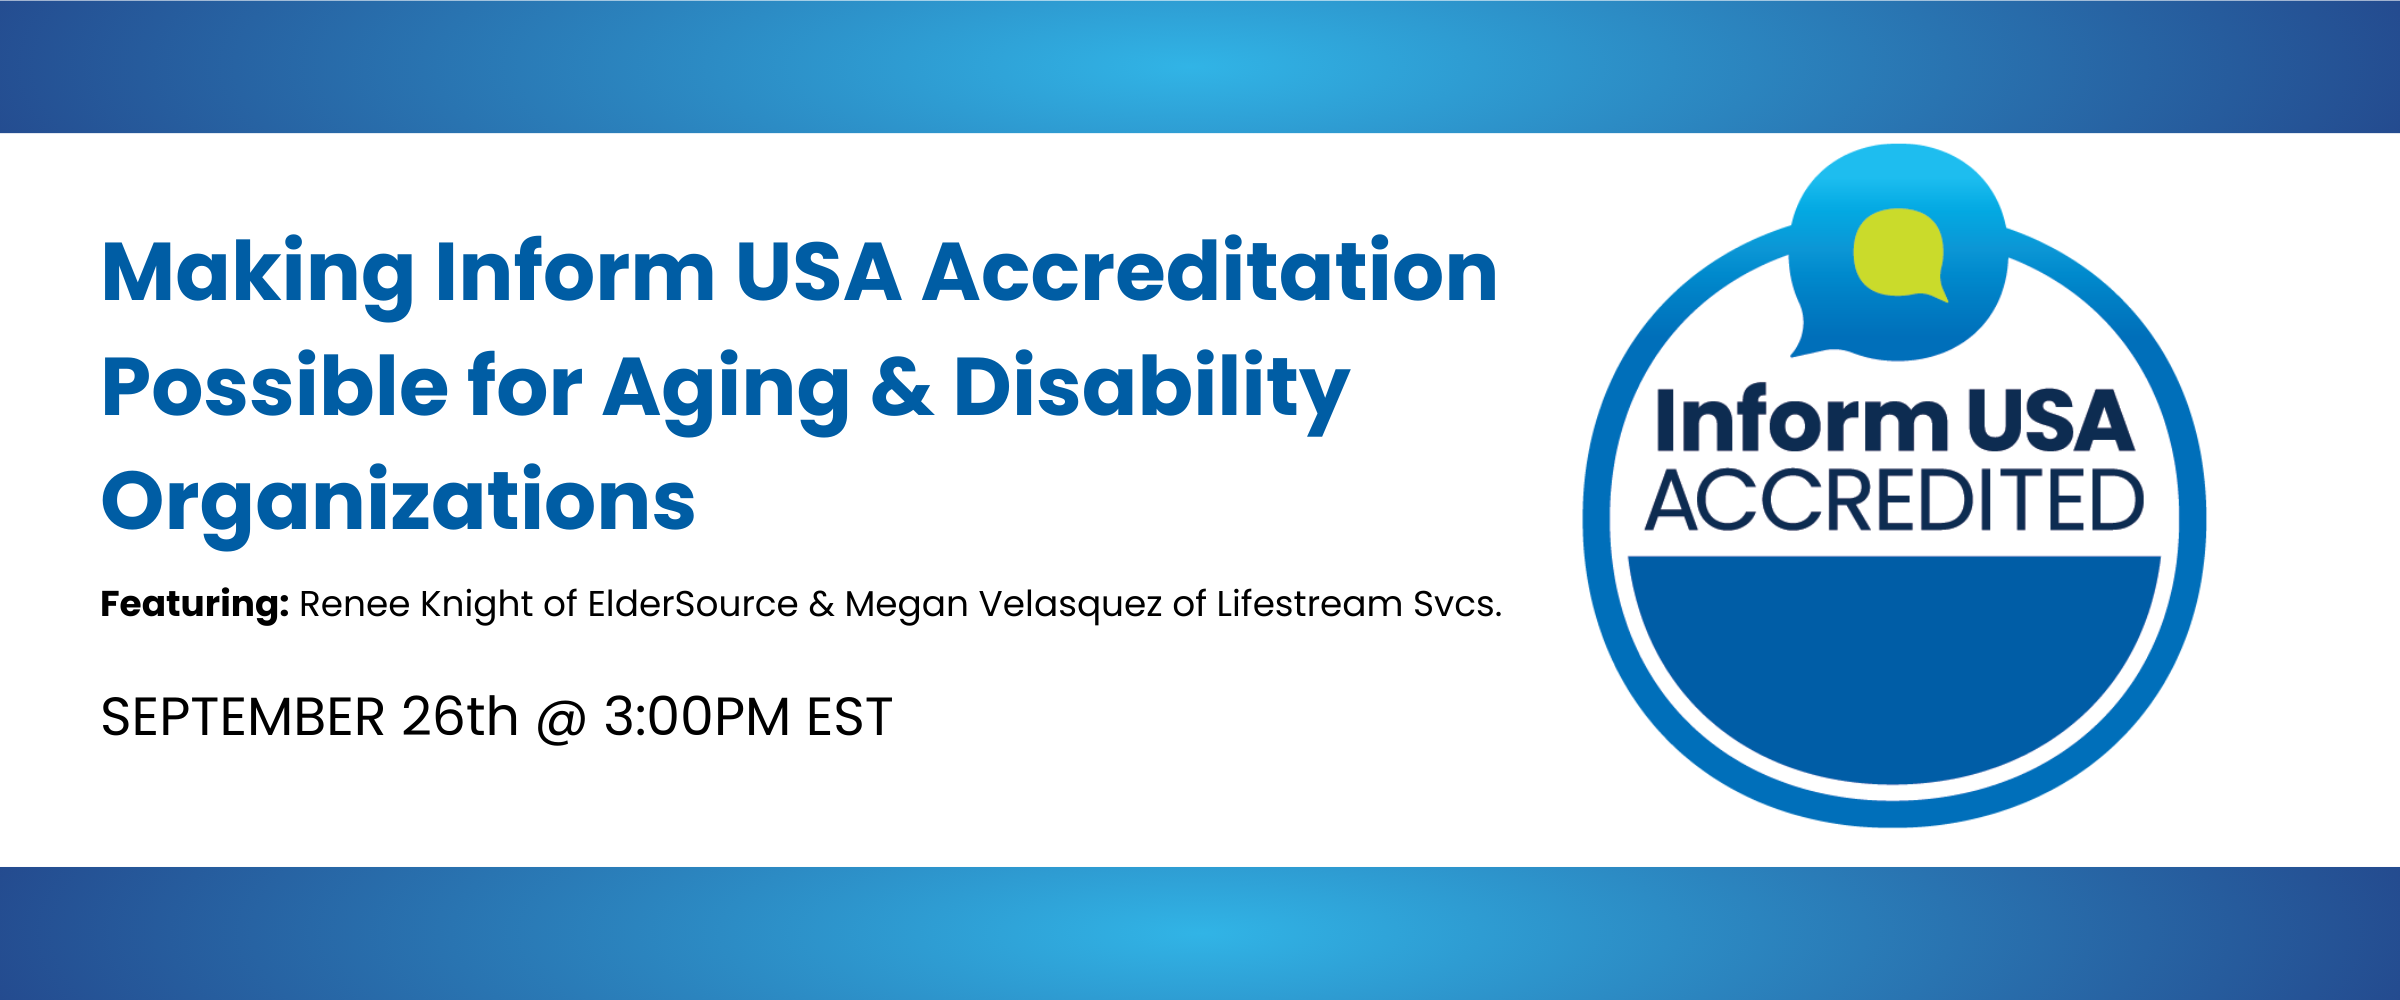 Inform USA Webinar - Making Inform USA Accreditation Possible for Aging & Disability Organizations